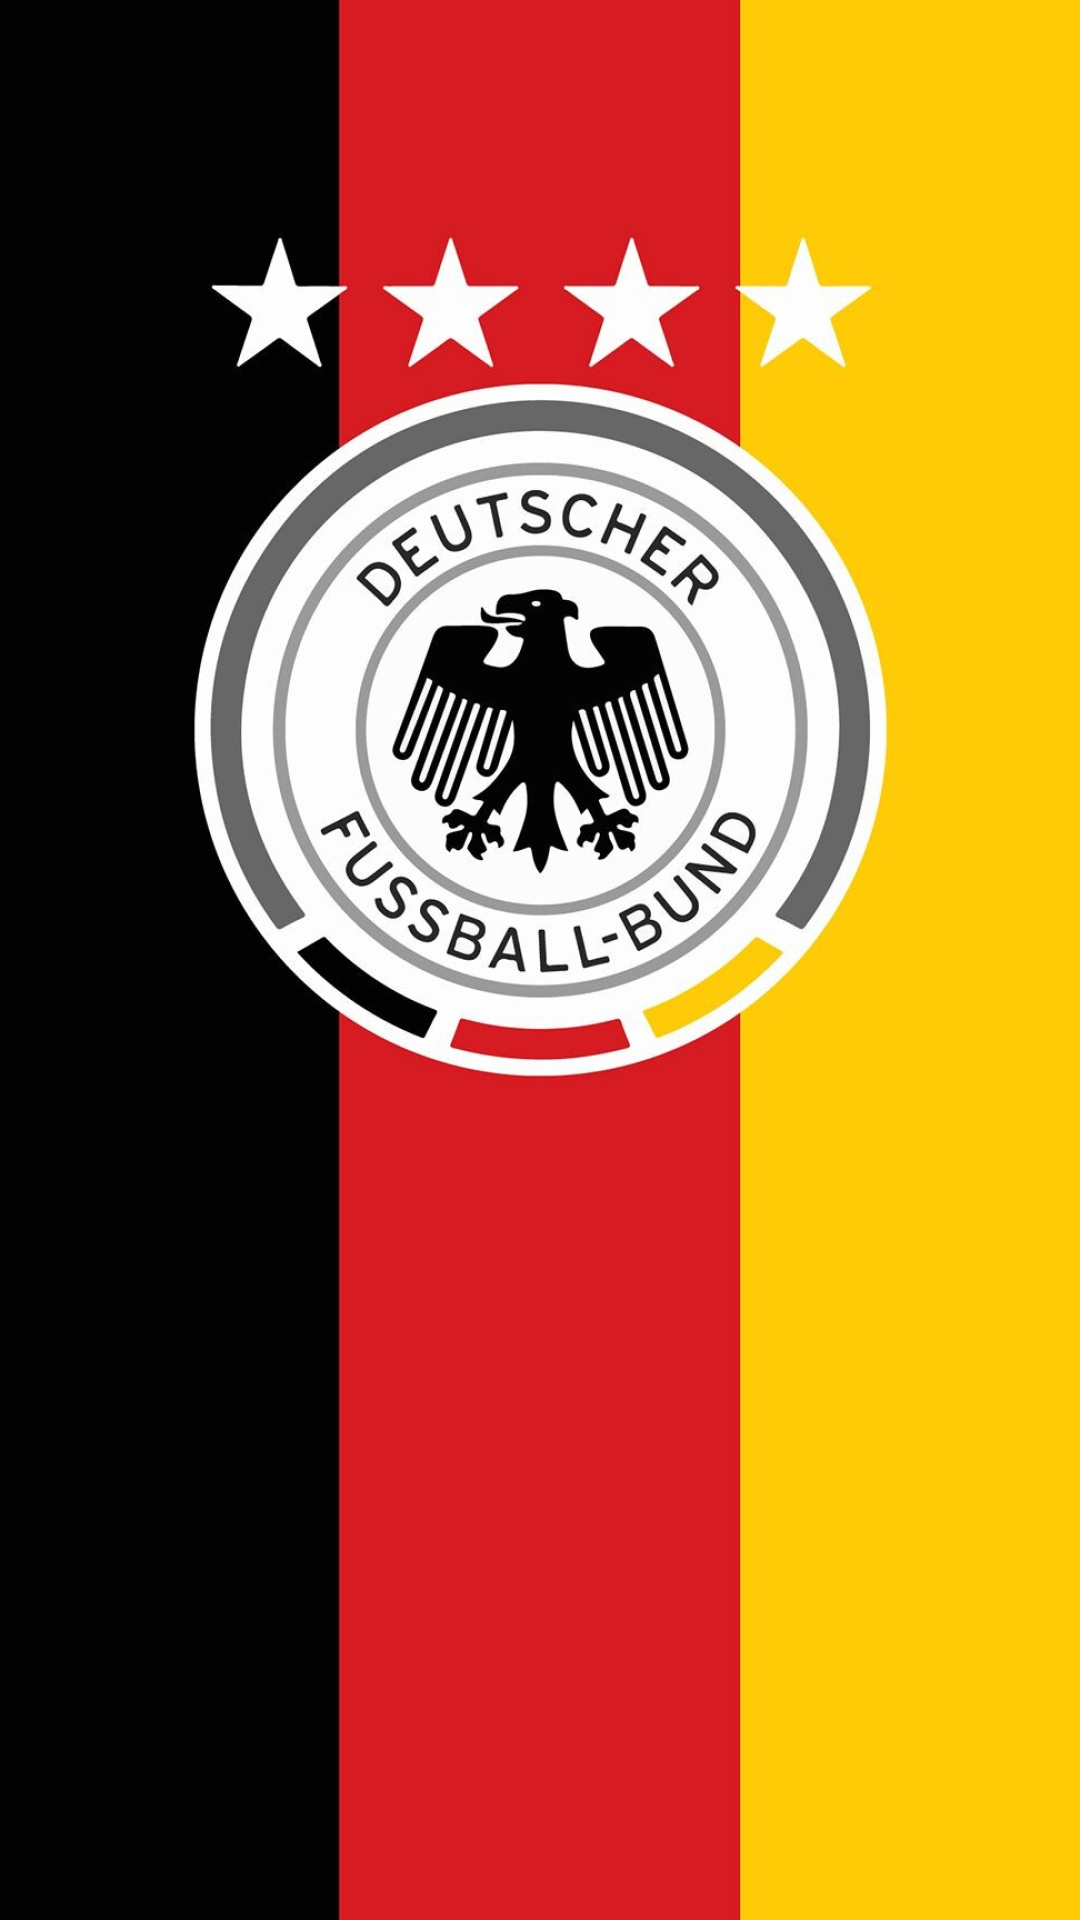 Germany Soccer Team: One of the most famous and successful international football unions in the world. 1080x1920 Full HD Wallpaper.